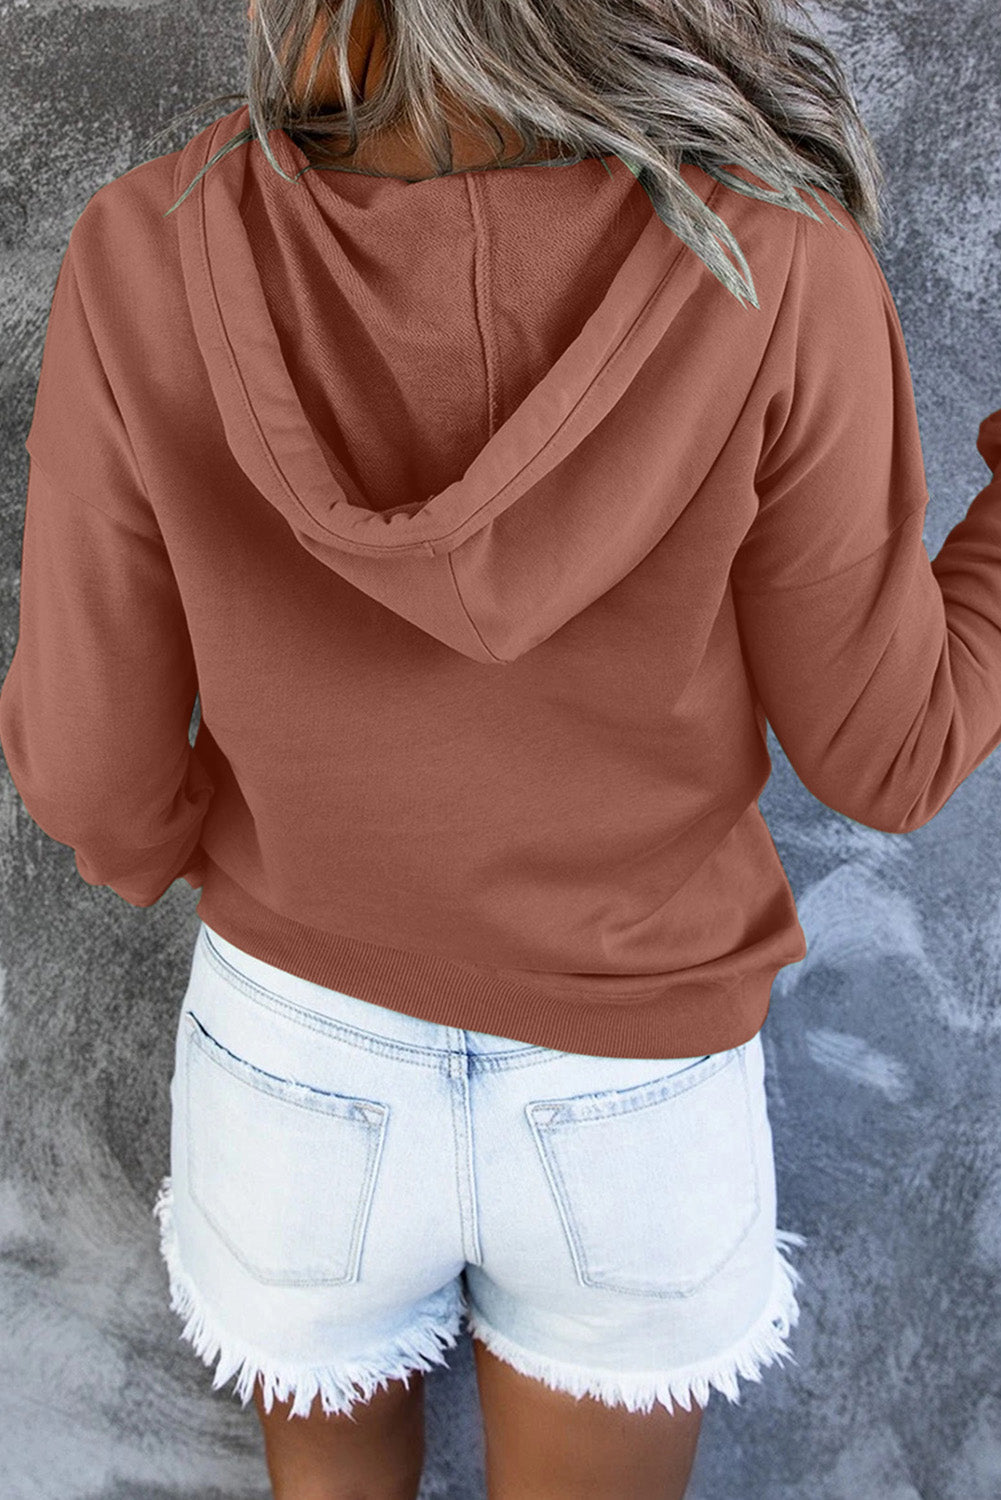 Dropped Shoulder Long Sleeve Hoodie with Pocket - Women’s Clothing & Accessories - Shirts & Tops - 27 - 2024